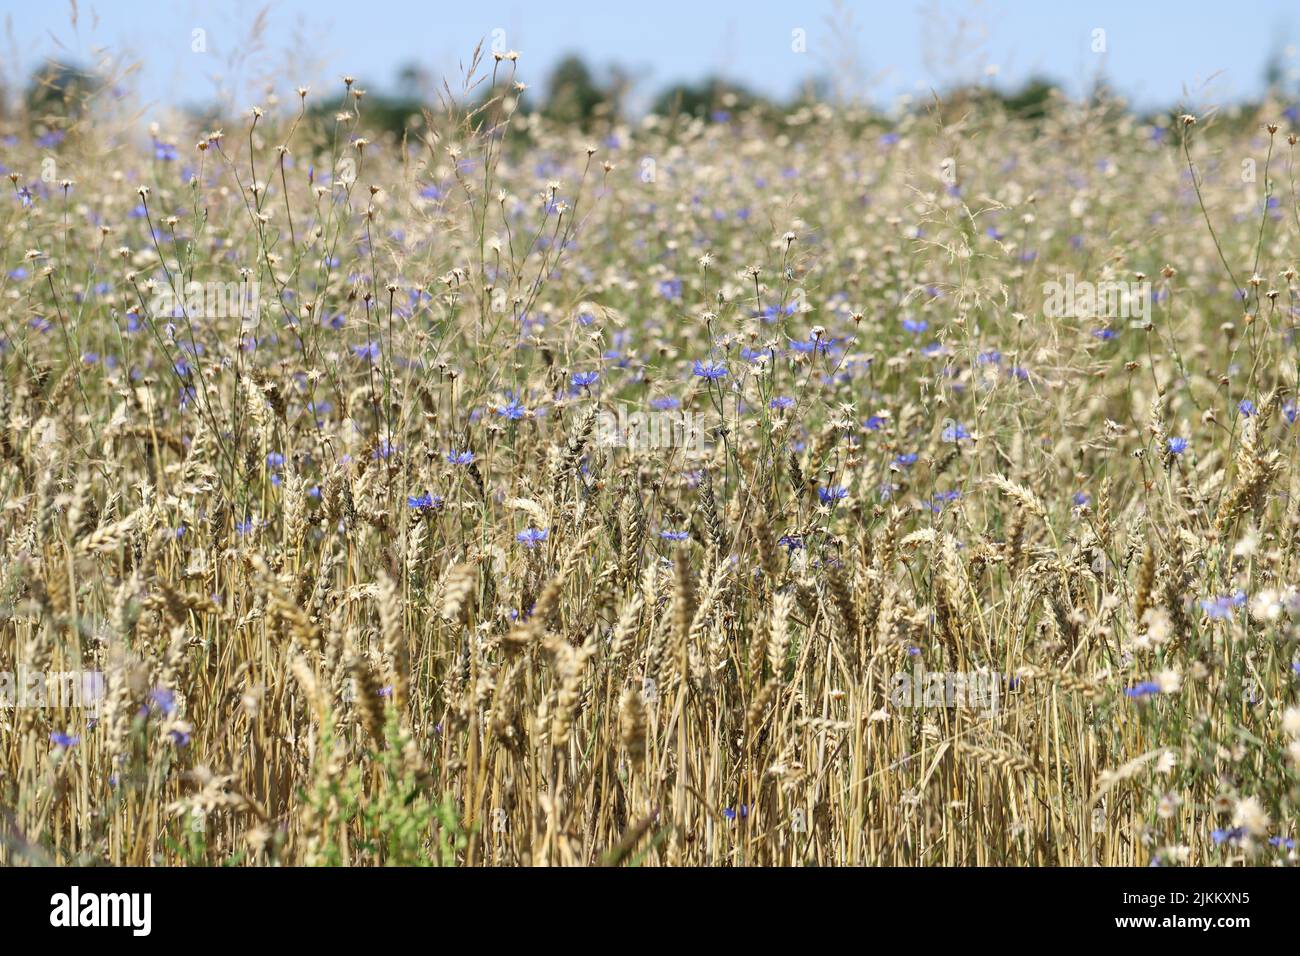 Cultivation of cereals with numerous weeds. Stock Photo